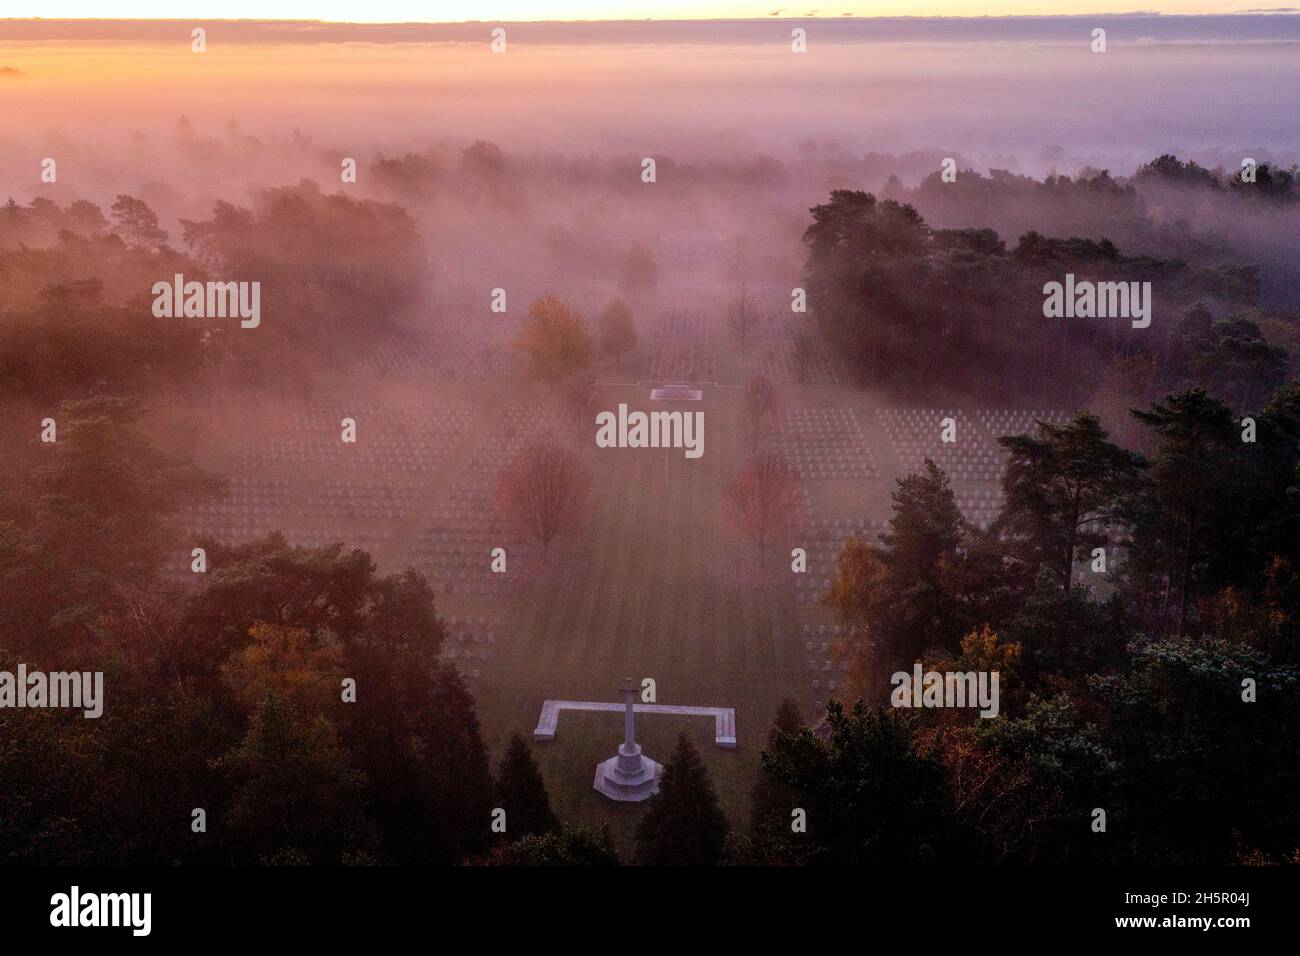 Sunrise on Armistice Day over First and Second World War graves at the Commonwealth War Graves Commission's Brookwood Military Cemetery in Woking Surrey. People across the UK will observe a two minute silence at 11 o'clock to remember the war dead. Picture date: Thursday November 11, 2021. Stock Photo